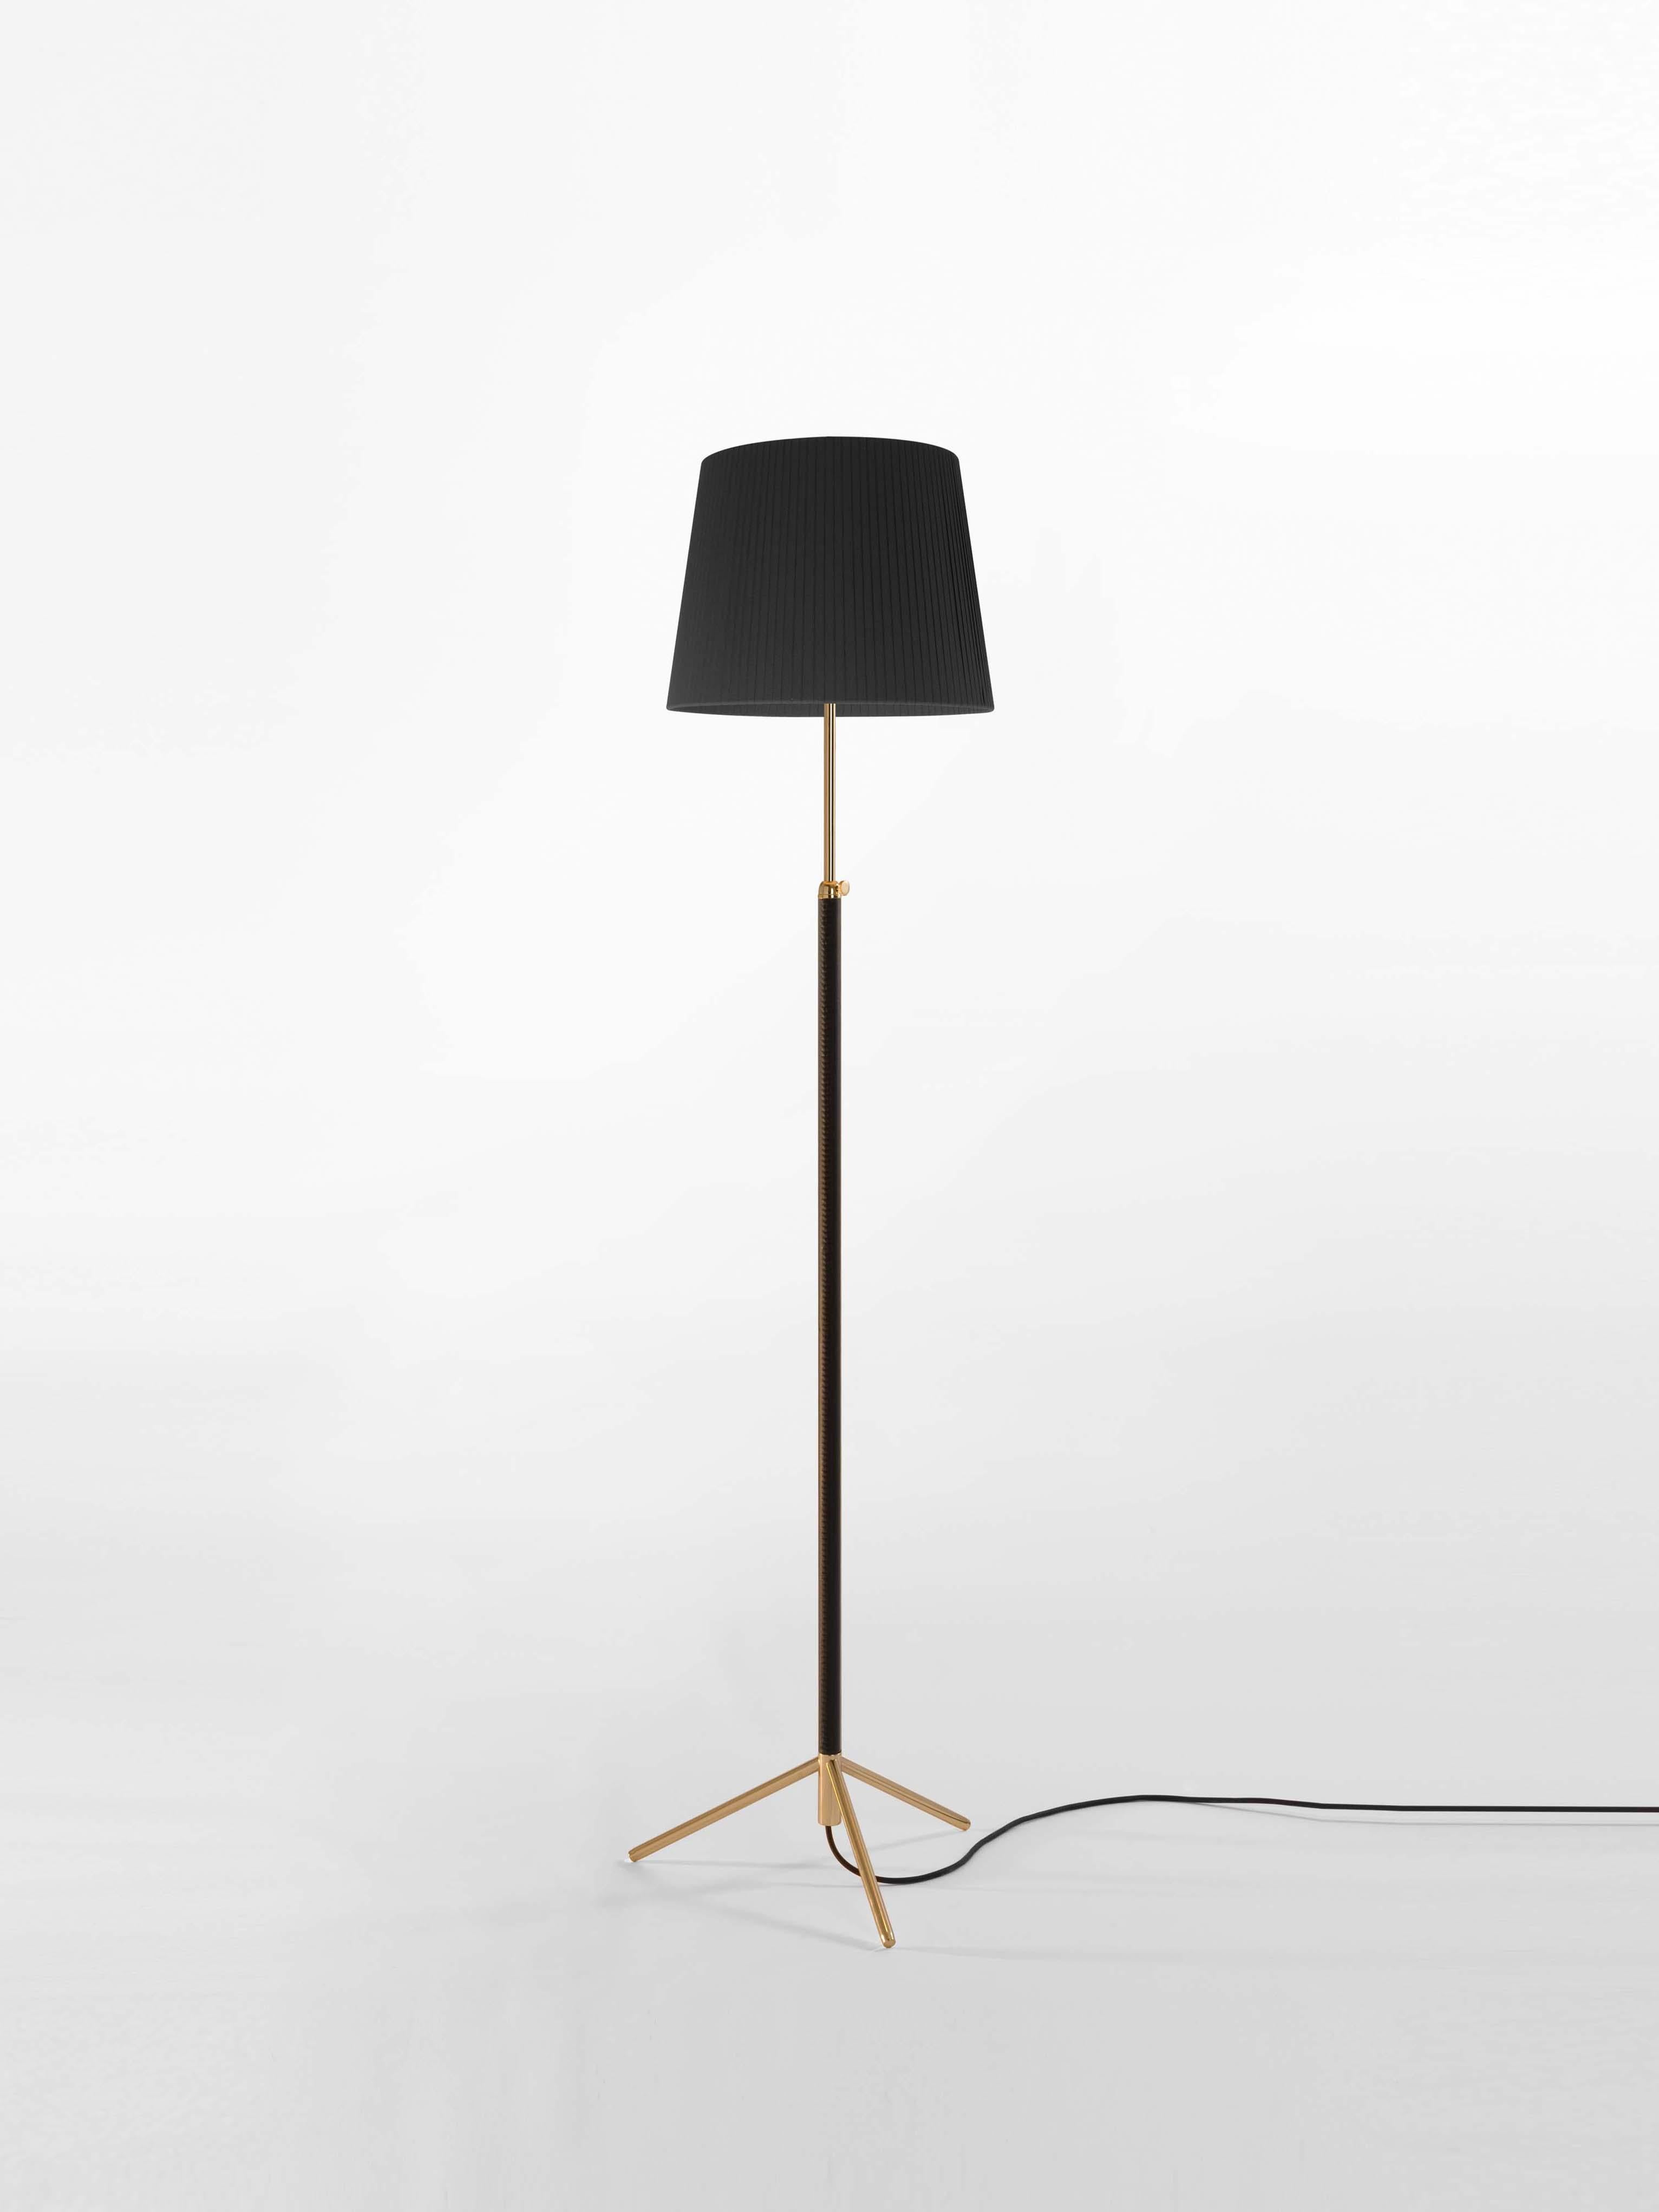 Black and brass pie de Salón G3 floor lamp by Jaume Sans
Dimensions: D 40 x H 120-160 cm
Materials: Metal, leather, ribbon.
Available in chrome-plated or polished brass structure.
Available in other shade colors and sizes.

This slender